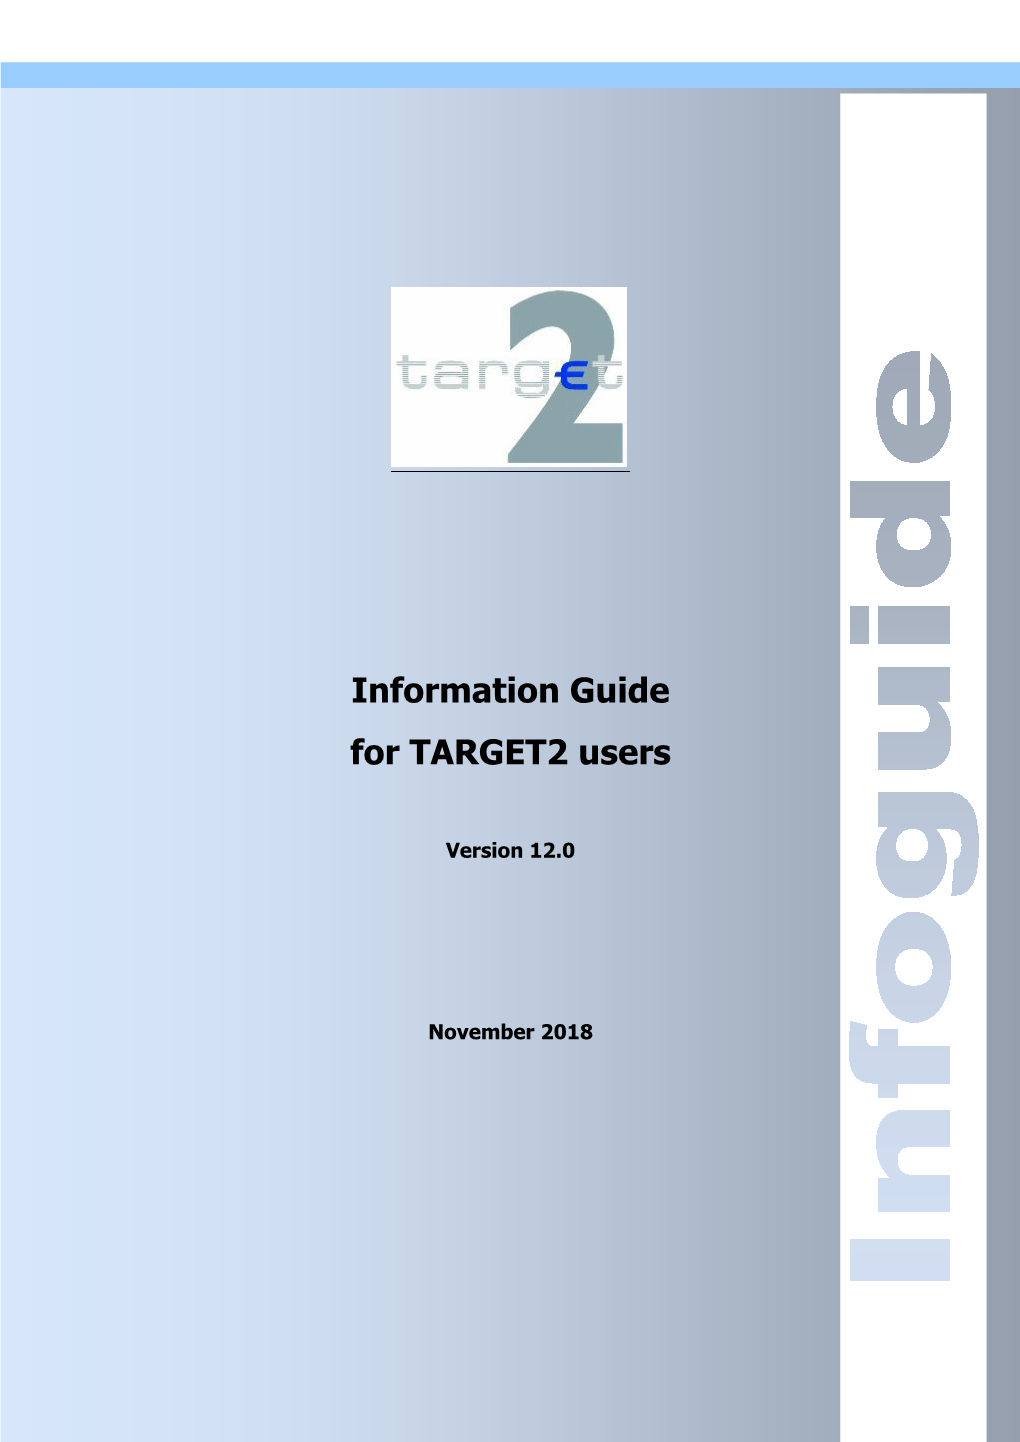 Information Guide for TARGET2 Users Version 12.0